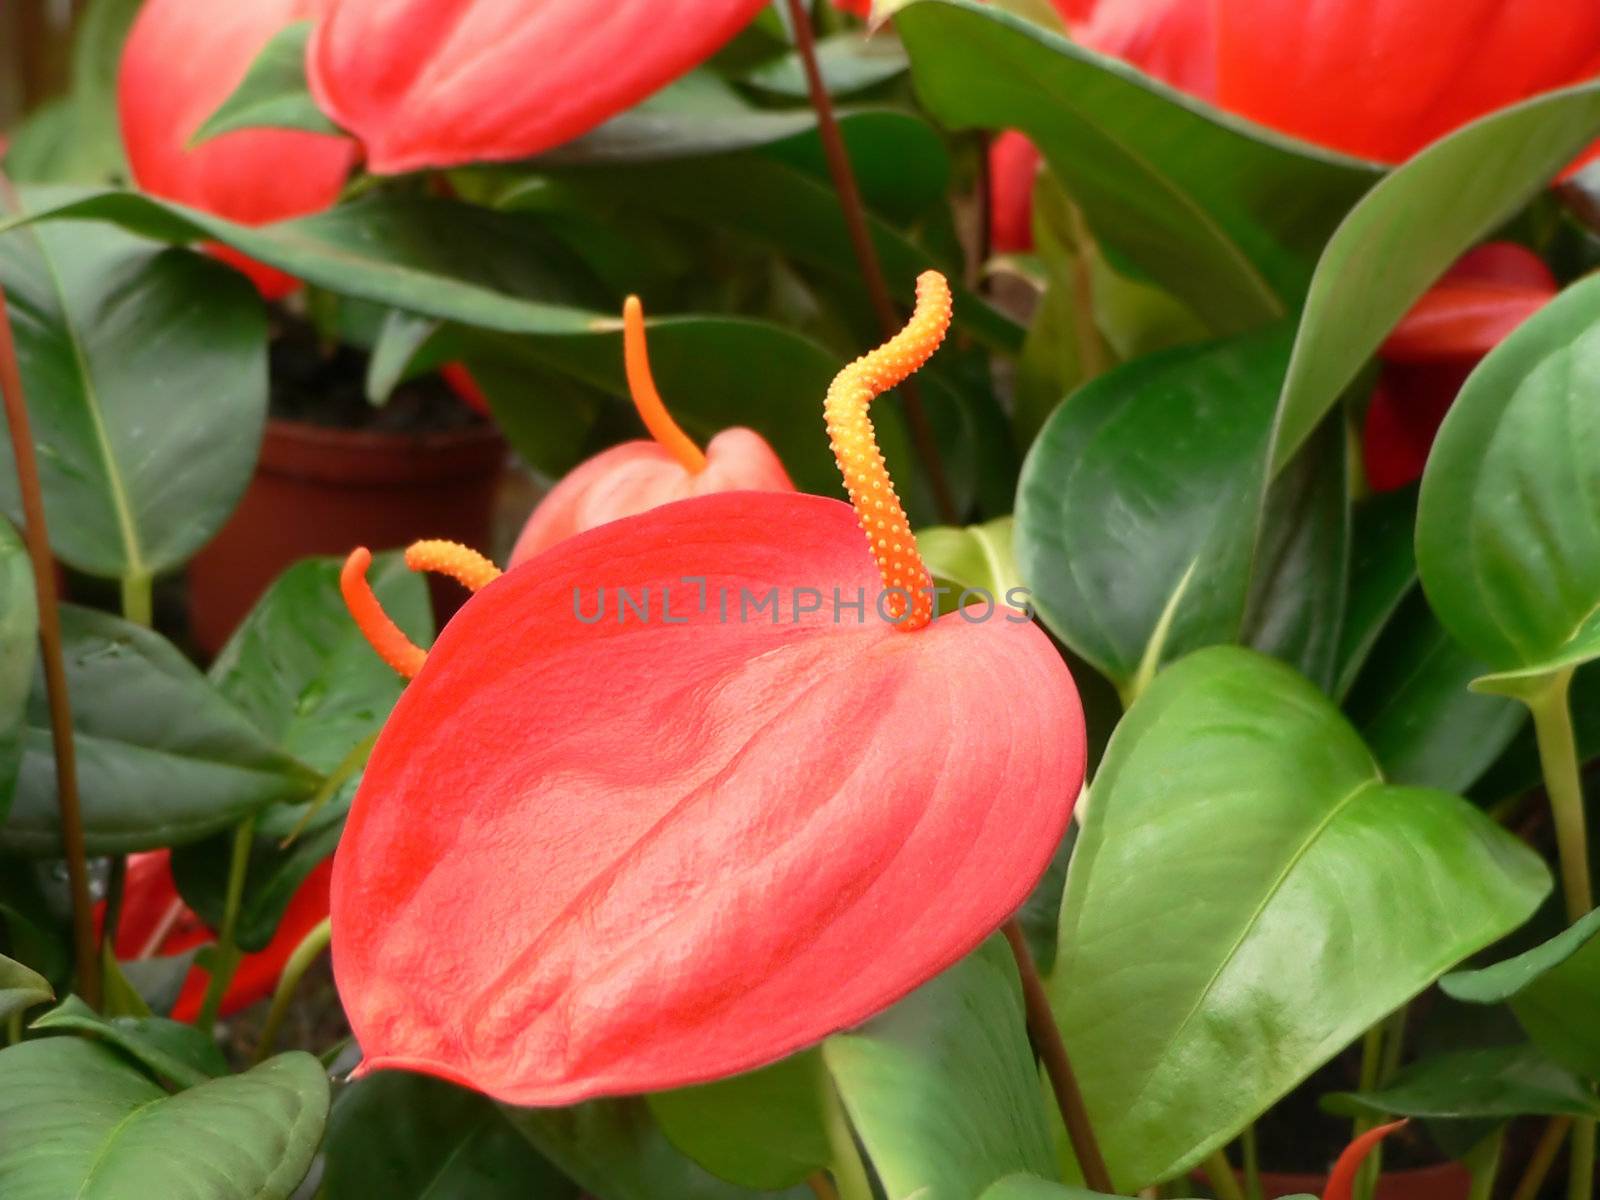 Flamingo lily or Anthurium also called "love flower" close-up